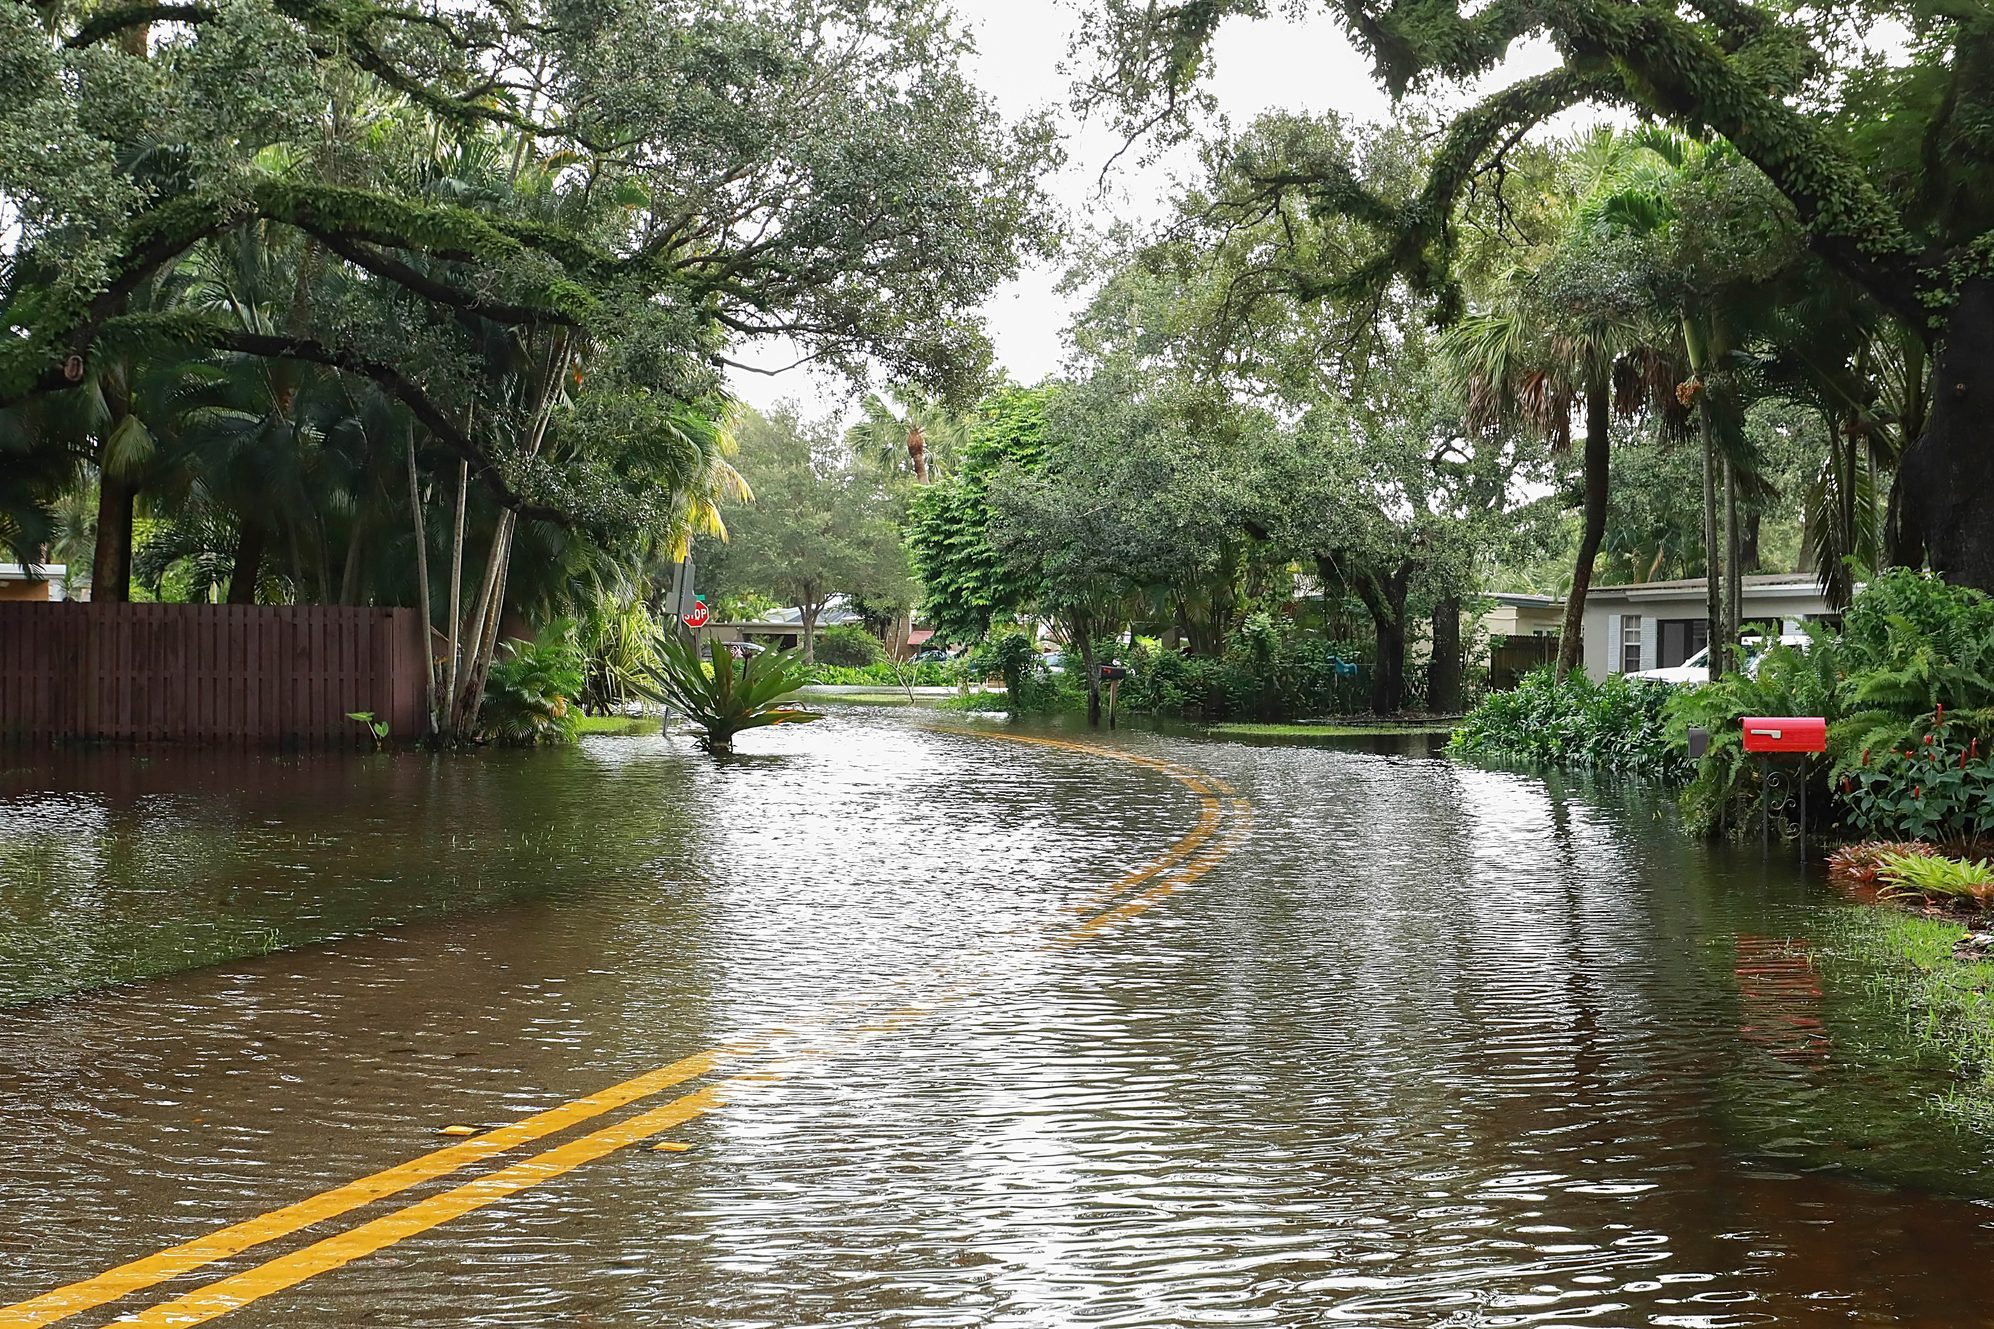 Flooded neighborhood streets in Fort Lauderdale, Florida, USA.